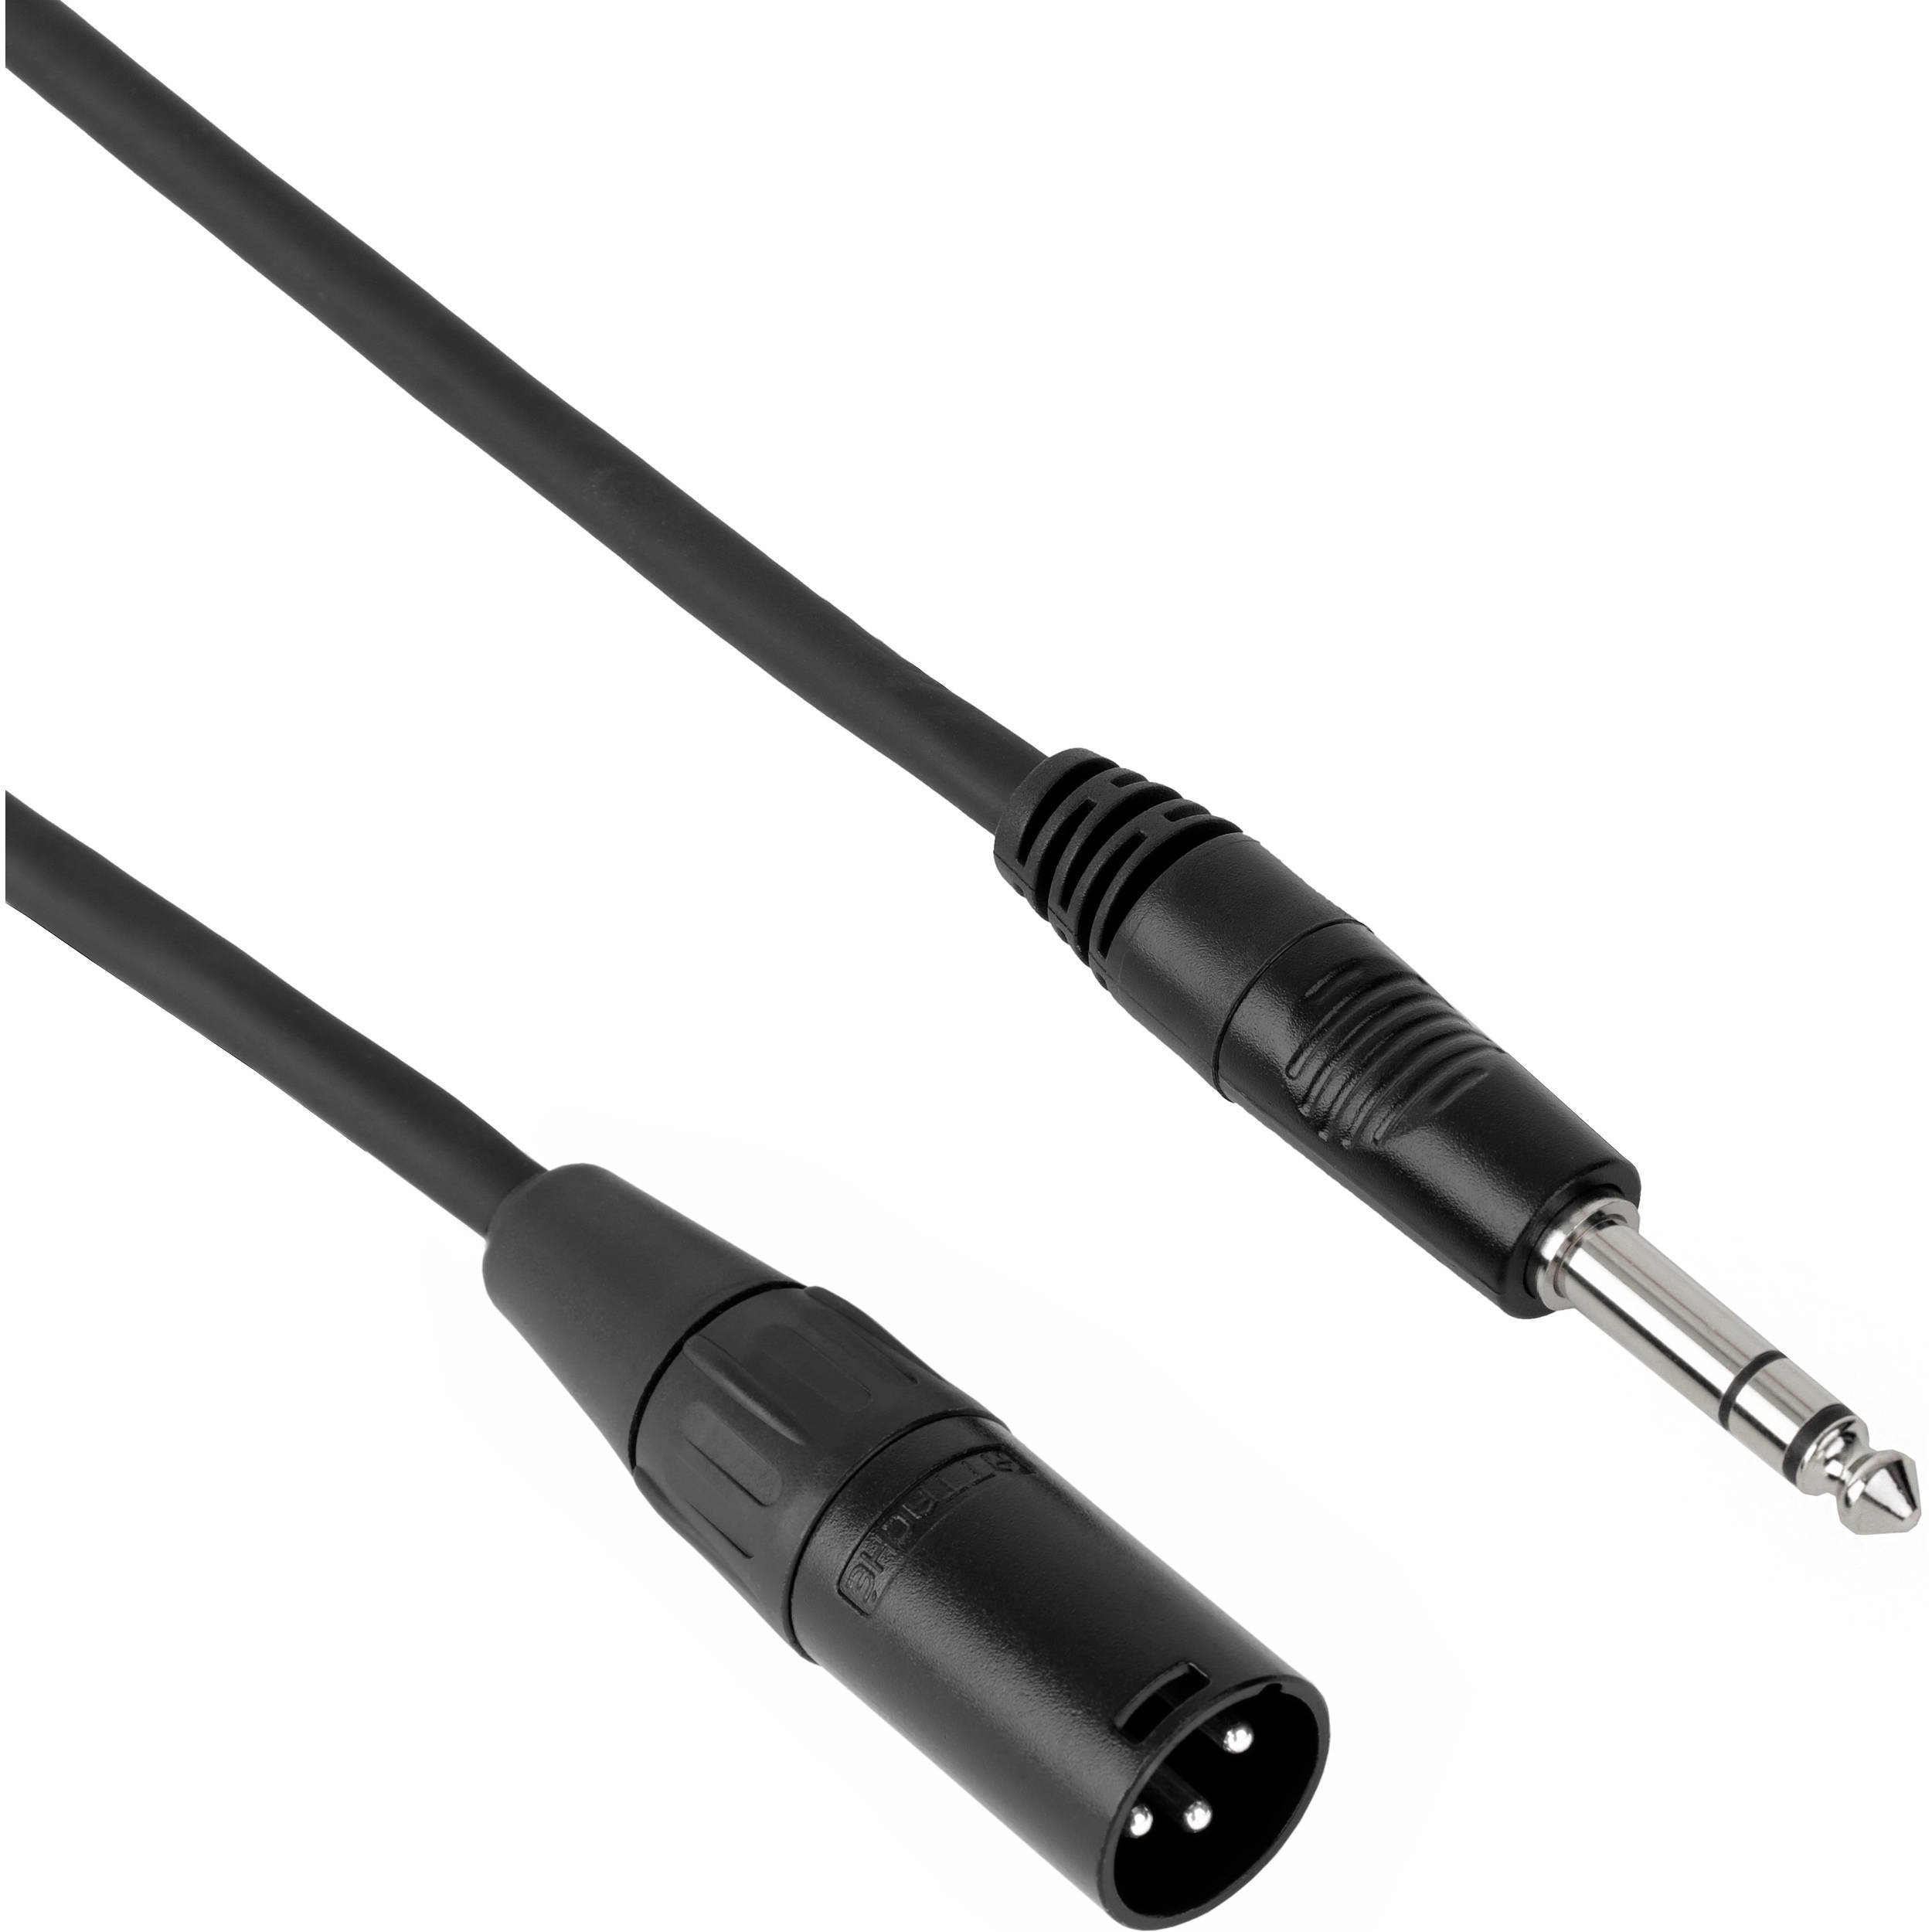 Pearstone PM Series 1/4" TRS M to XLR M Professional Interconnect Cable - 10' (3.0 m)